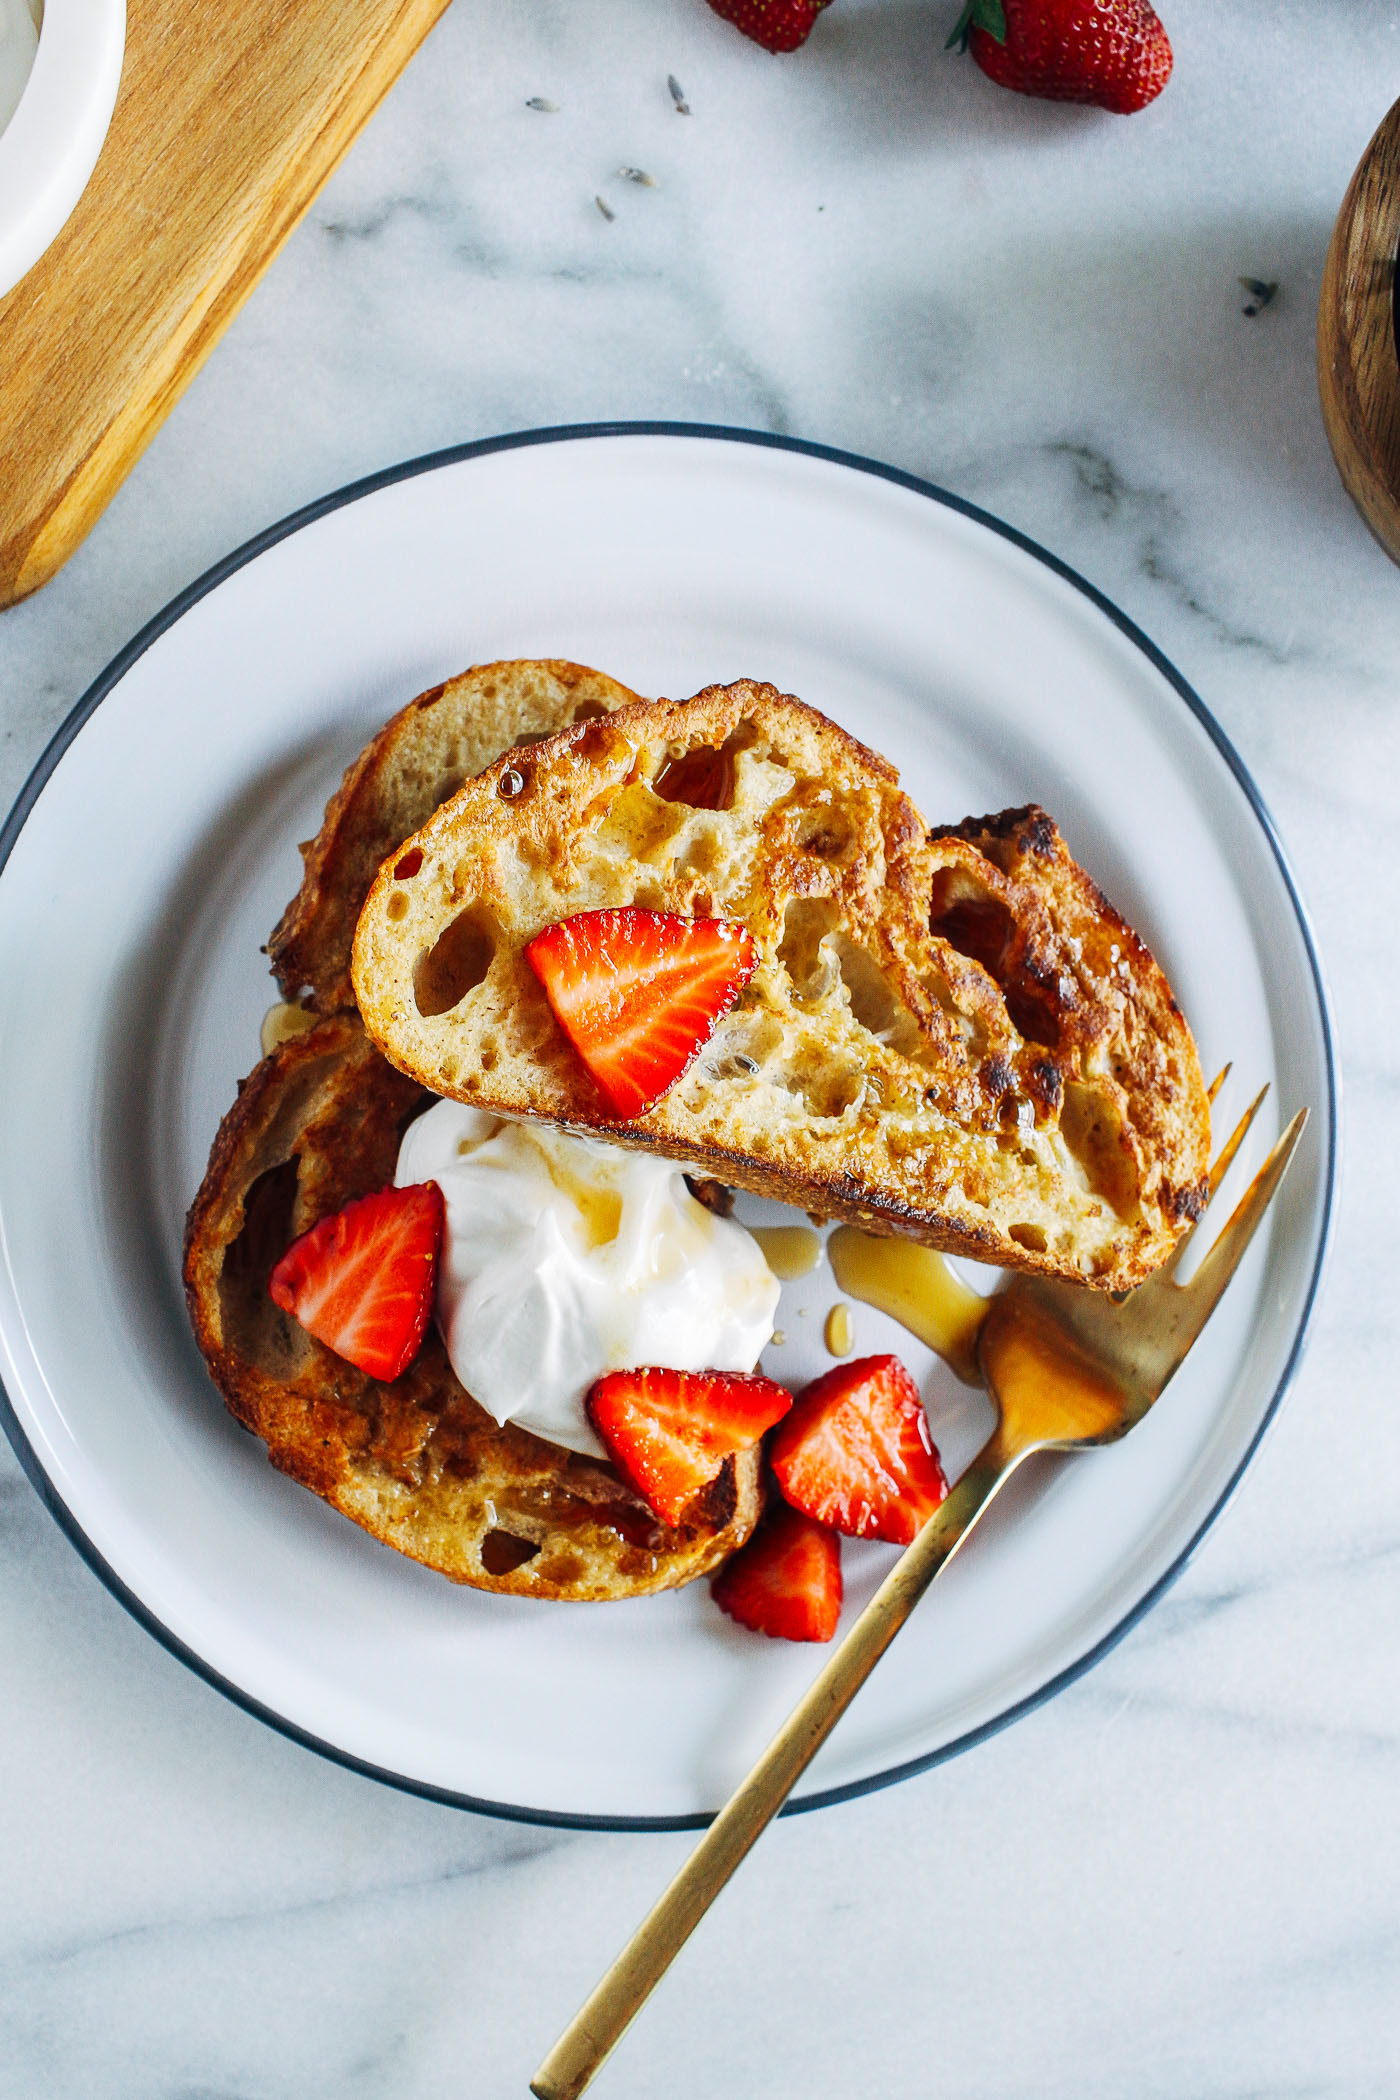 Vegan French Toast Recipe
 Vegan French Toast with Lavender Infused Syrup Making